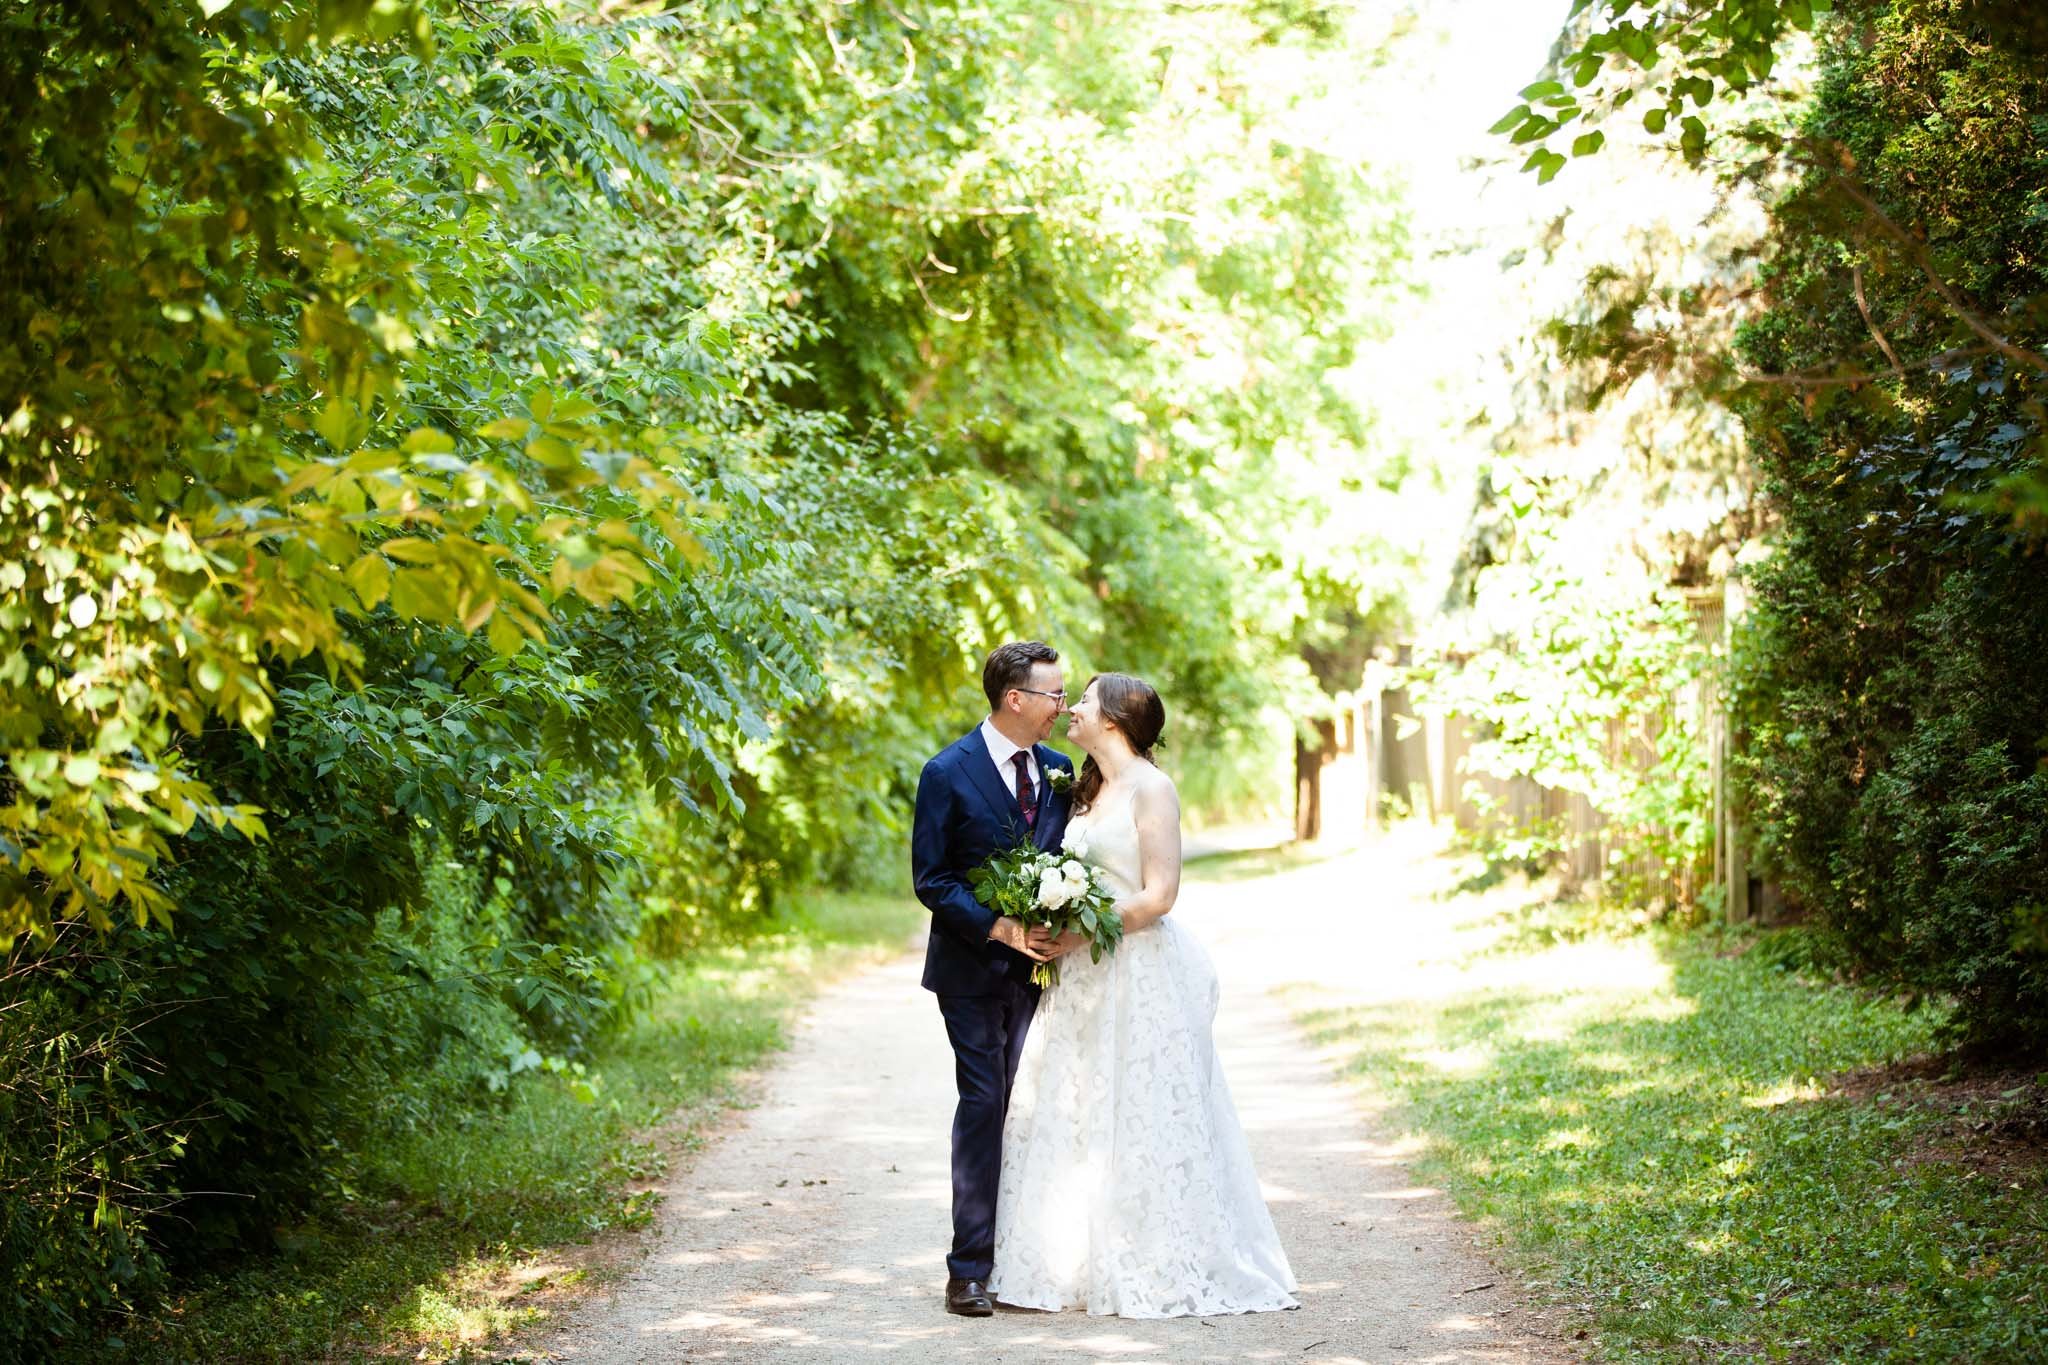 landscape shot of wedding couple on a path in a park.jpg